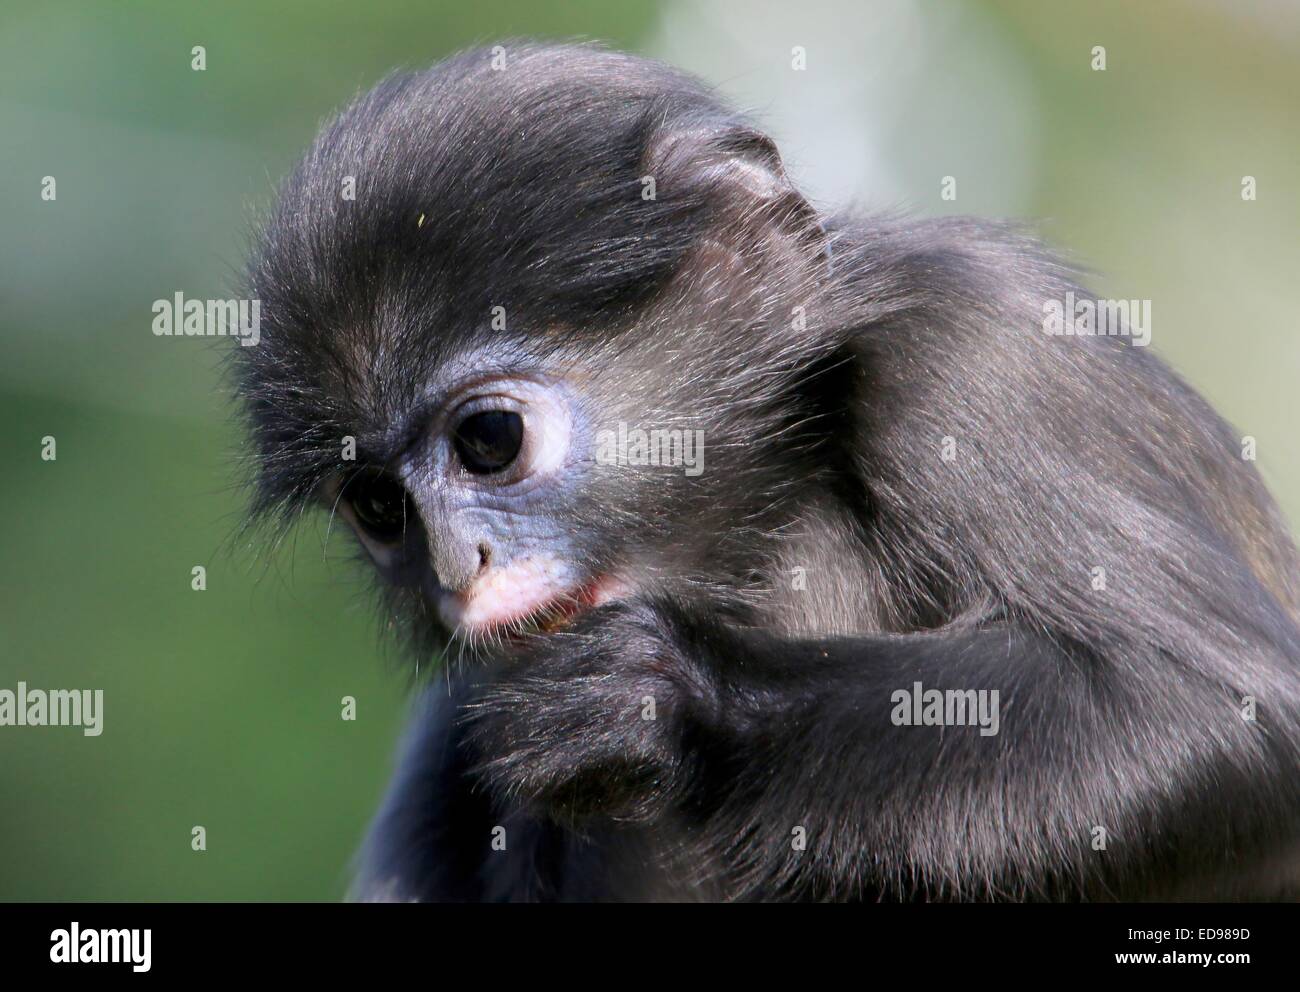 Baby Southeast Asian Dusky leaf monkey (Trachypithecus obscurus). A.k.a Spectacled langur or spectacled leaf monkey Stock Photo